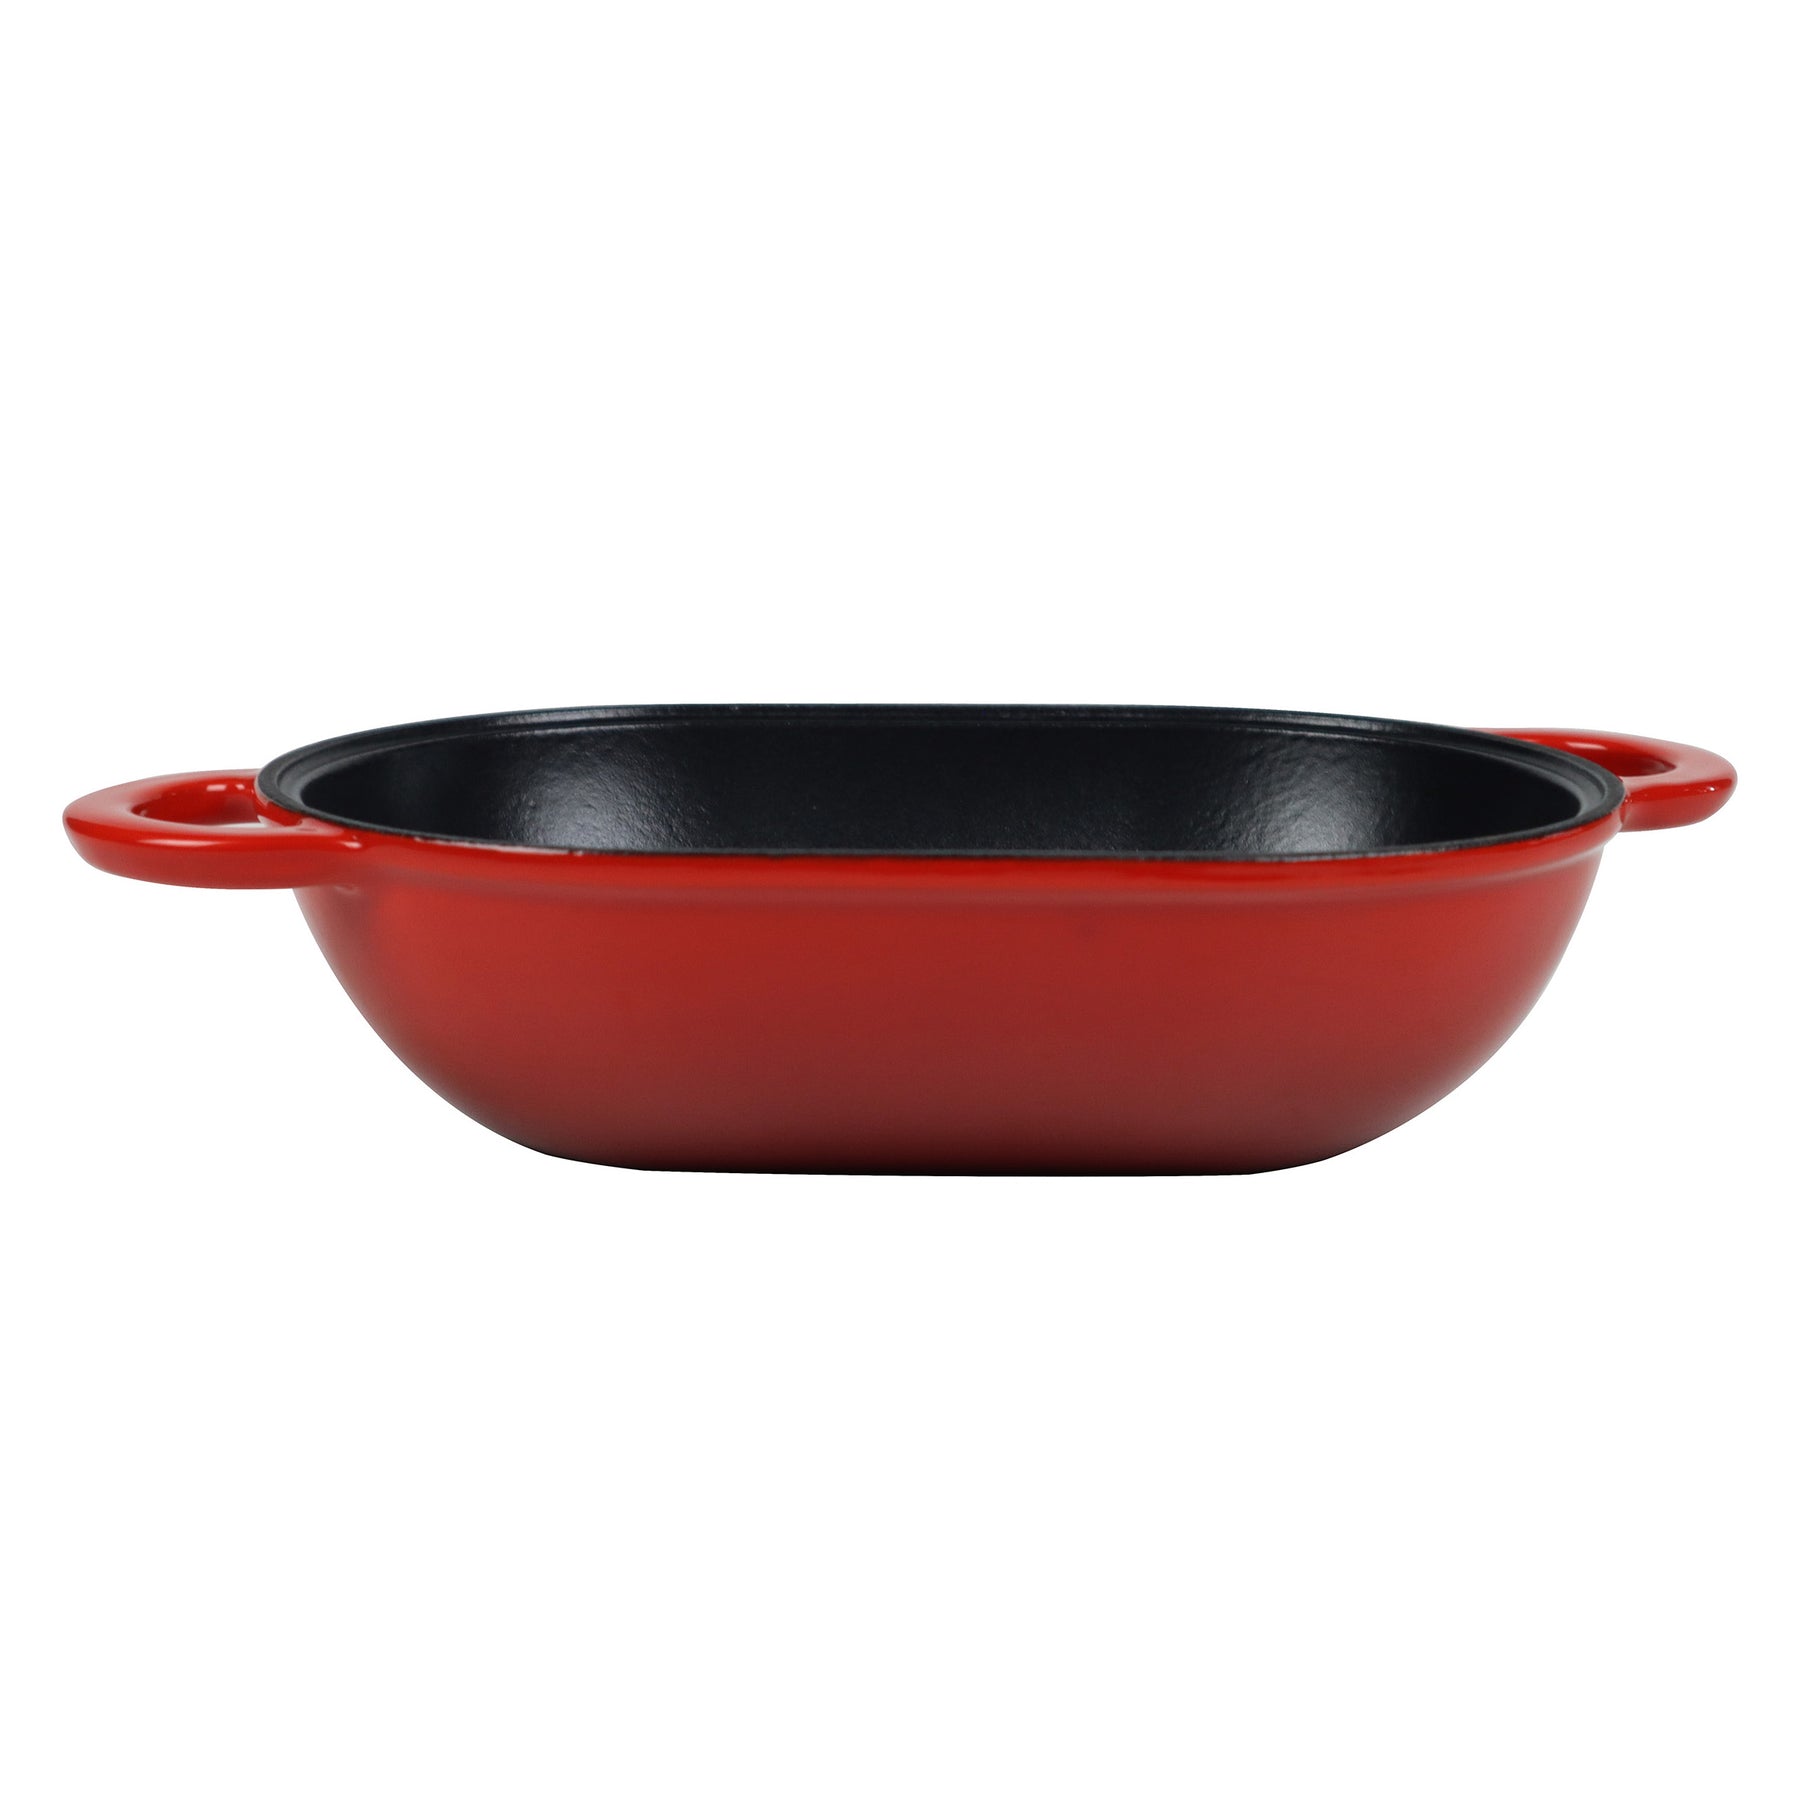 Crucible Cookware Enameled Cast Iron Bread Pan Dutch Oven with Lid and Loop Handles - Red – Oven Safe Form for Baking and Cooking, Artisan Bread Kit